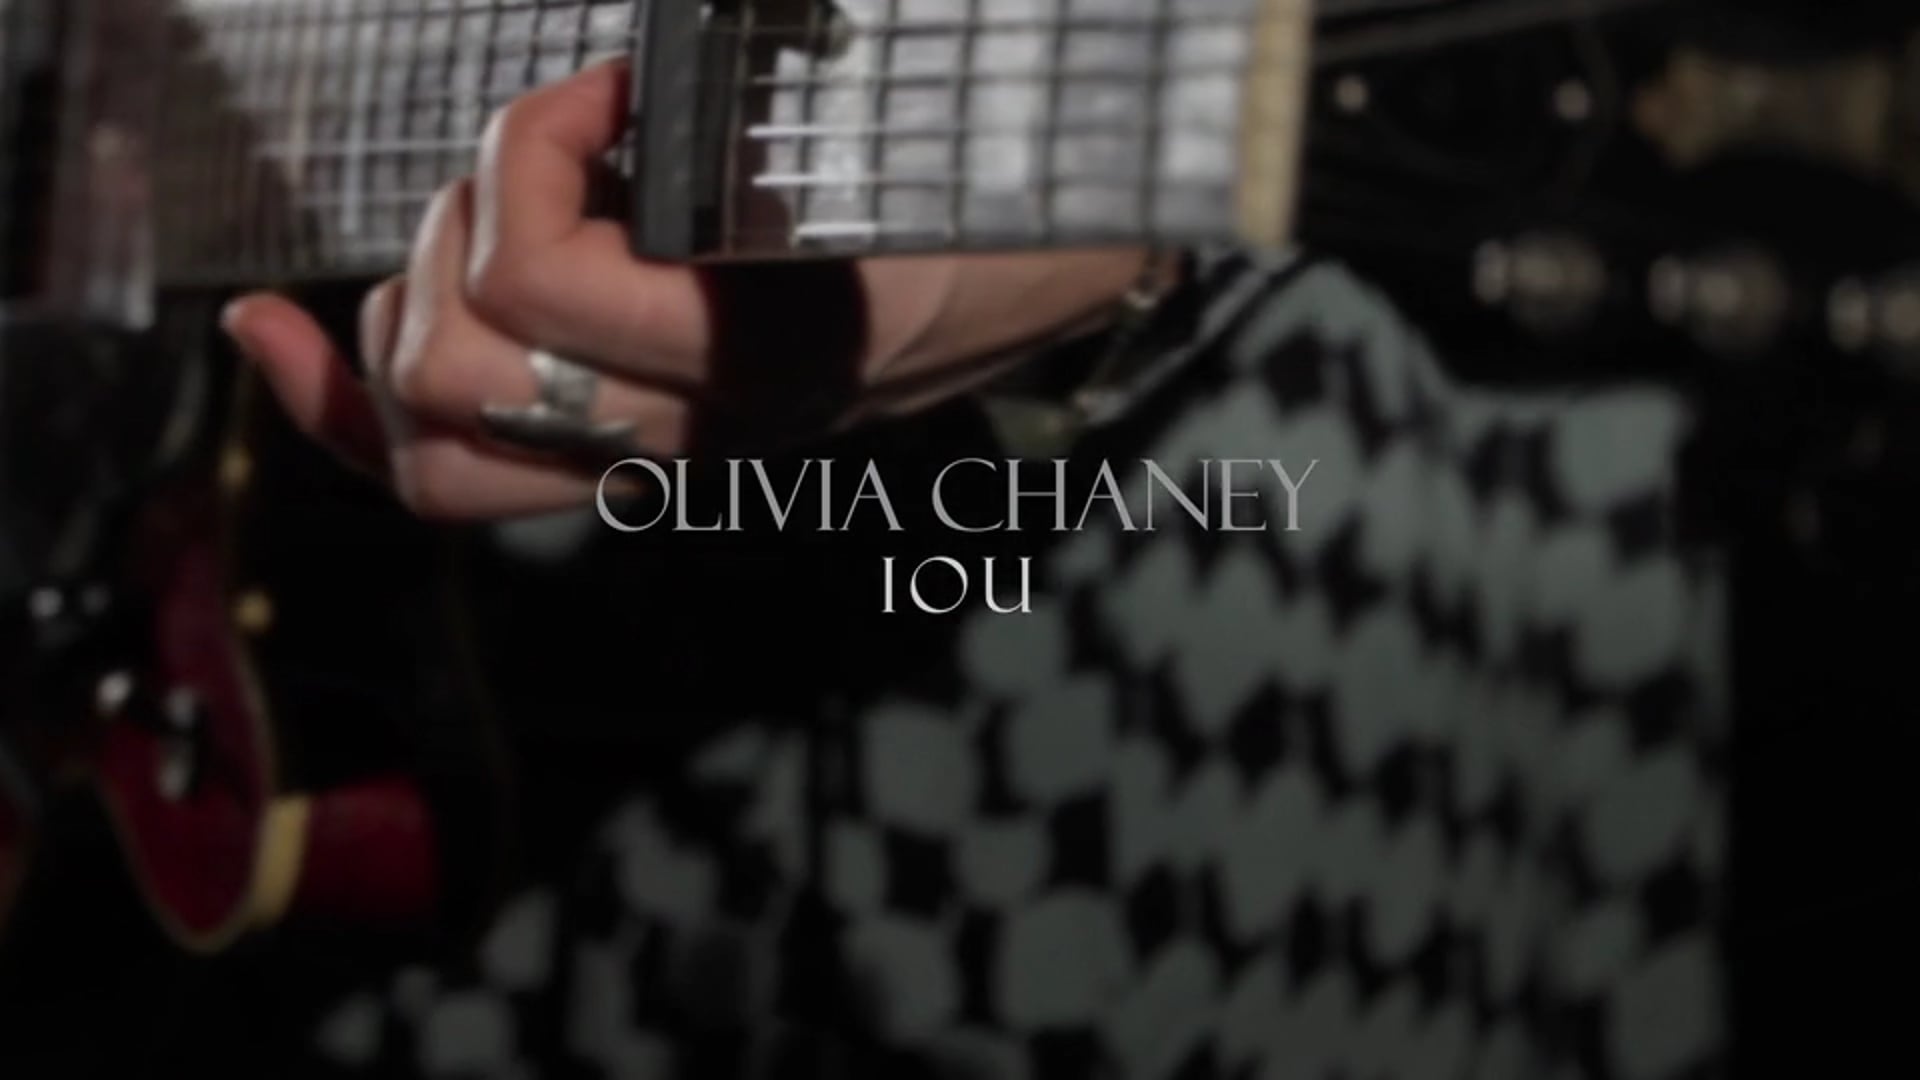 IOU - Olivia Chaney. Nonesuch Records